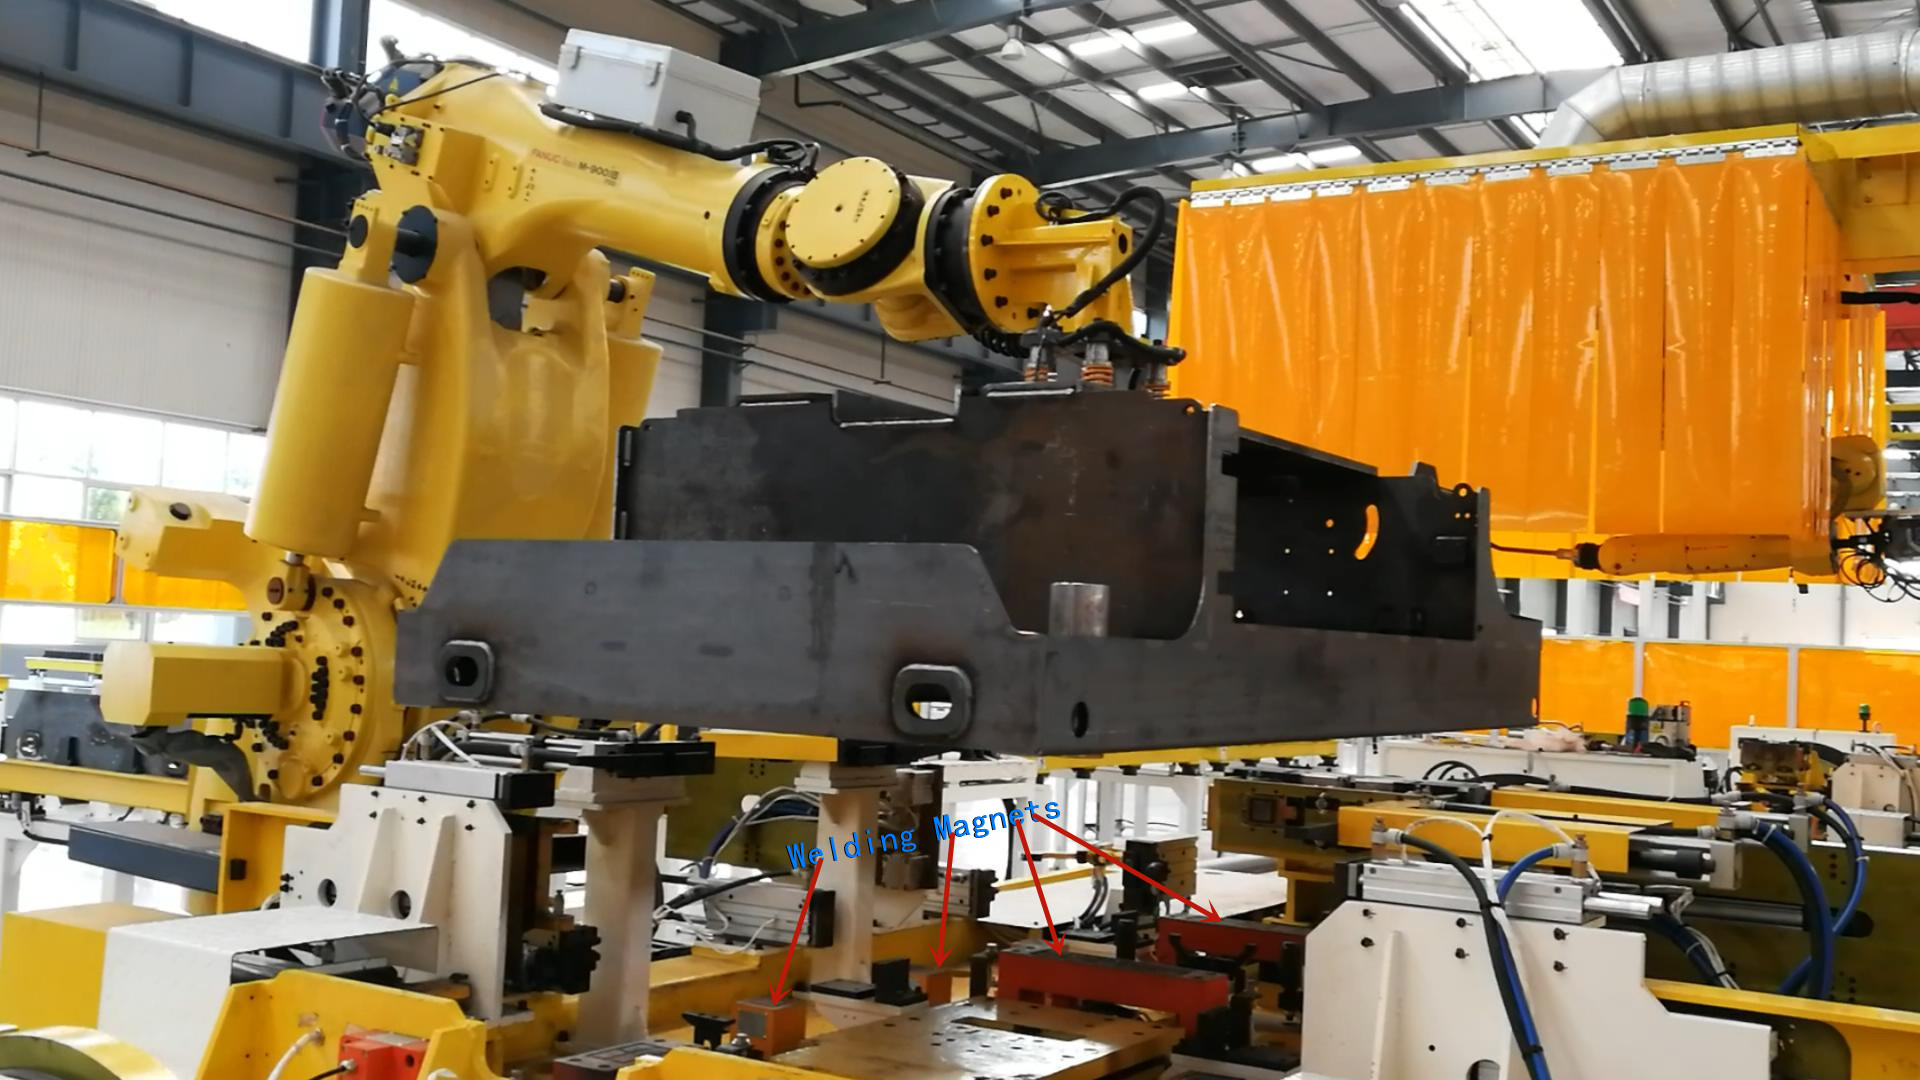 Pick and Place Magnet on Robotic Arm Lifting Steel Welding Workpiece - HVR MAG